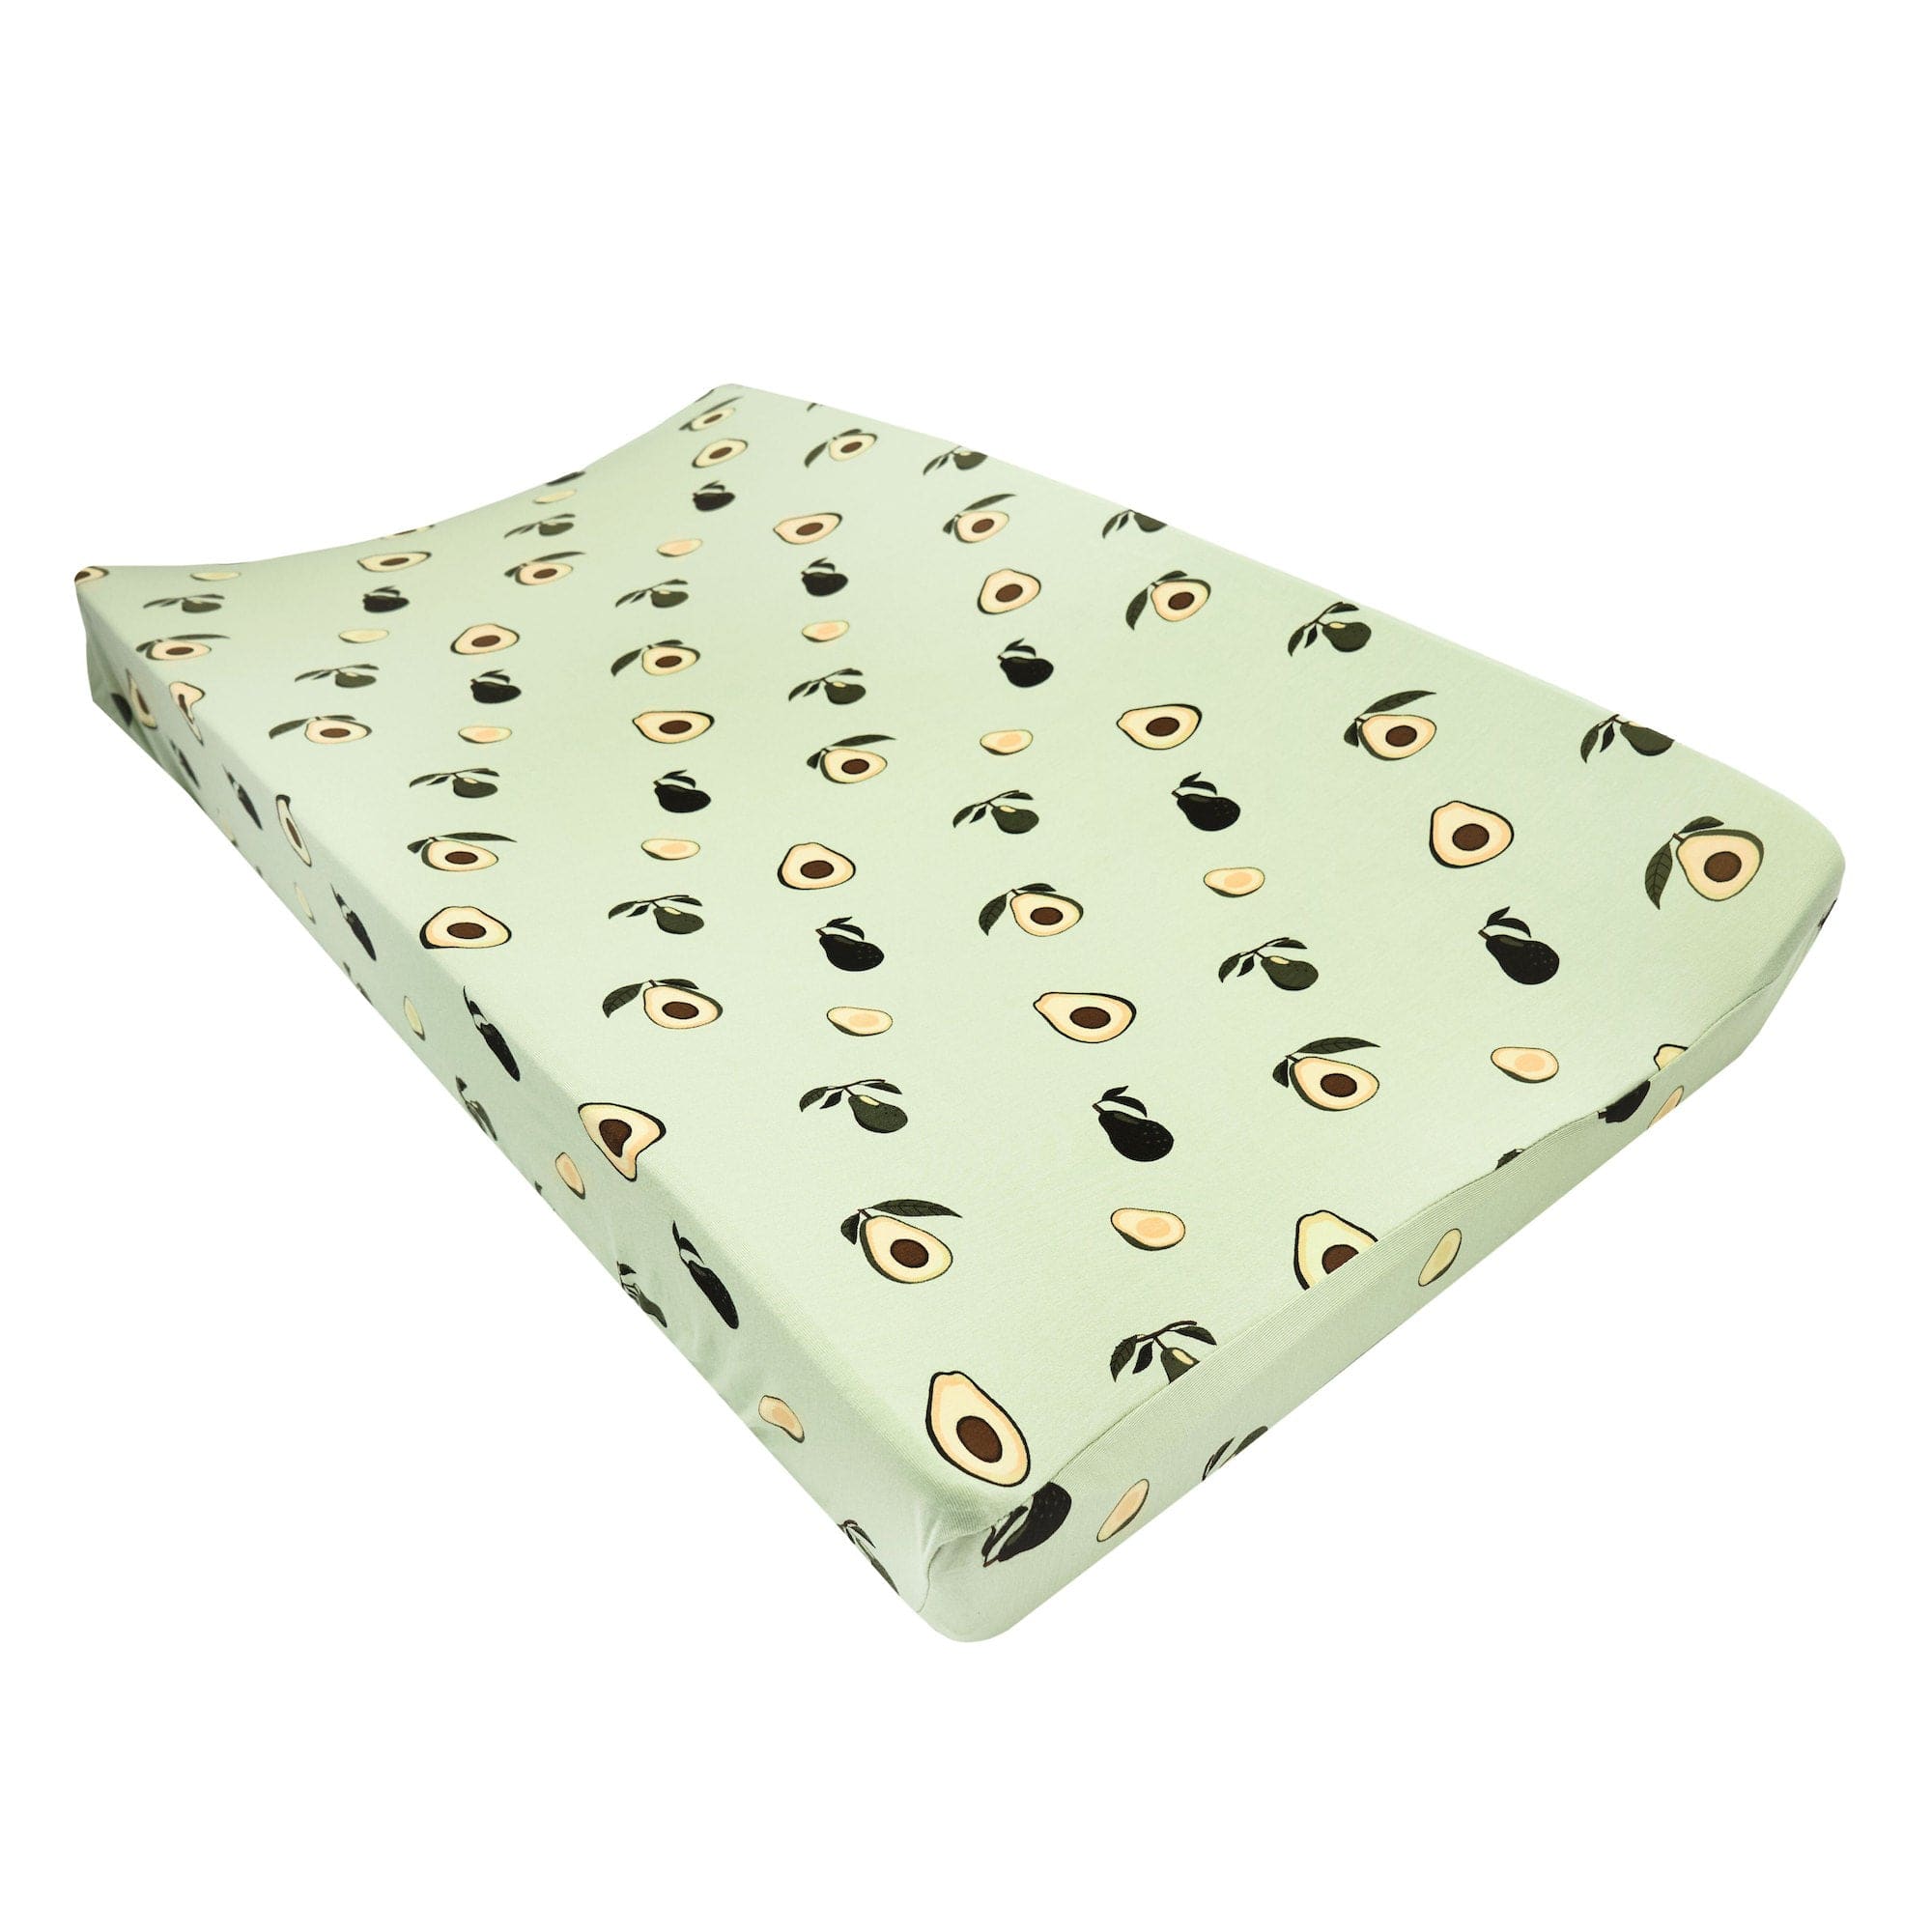 Kyte Baby Change Pad Cover Avocado / One Size Change Pad Cover in Avocado